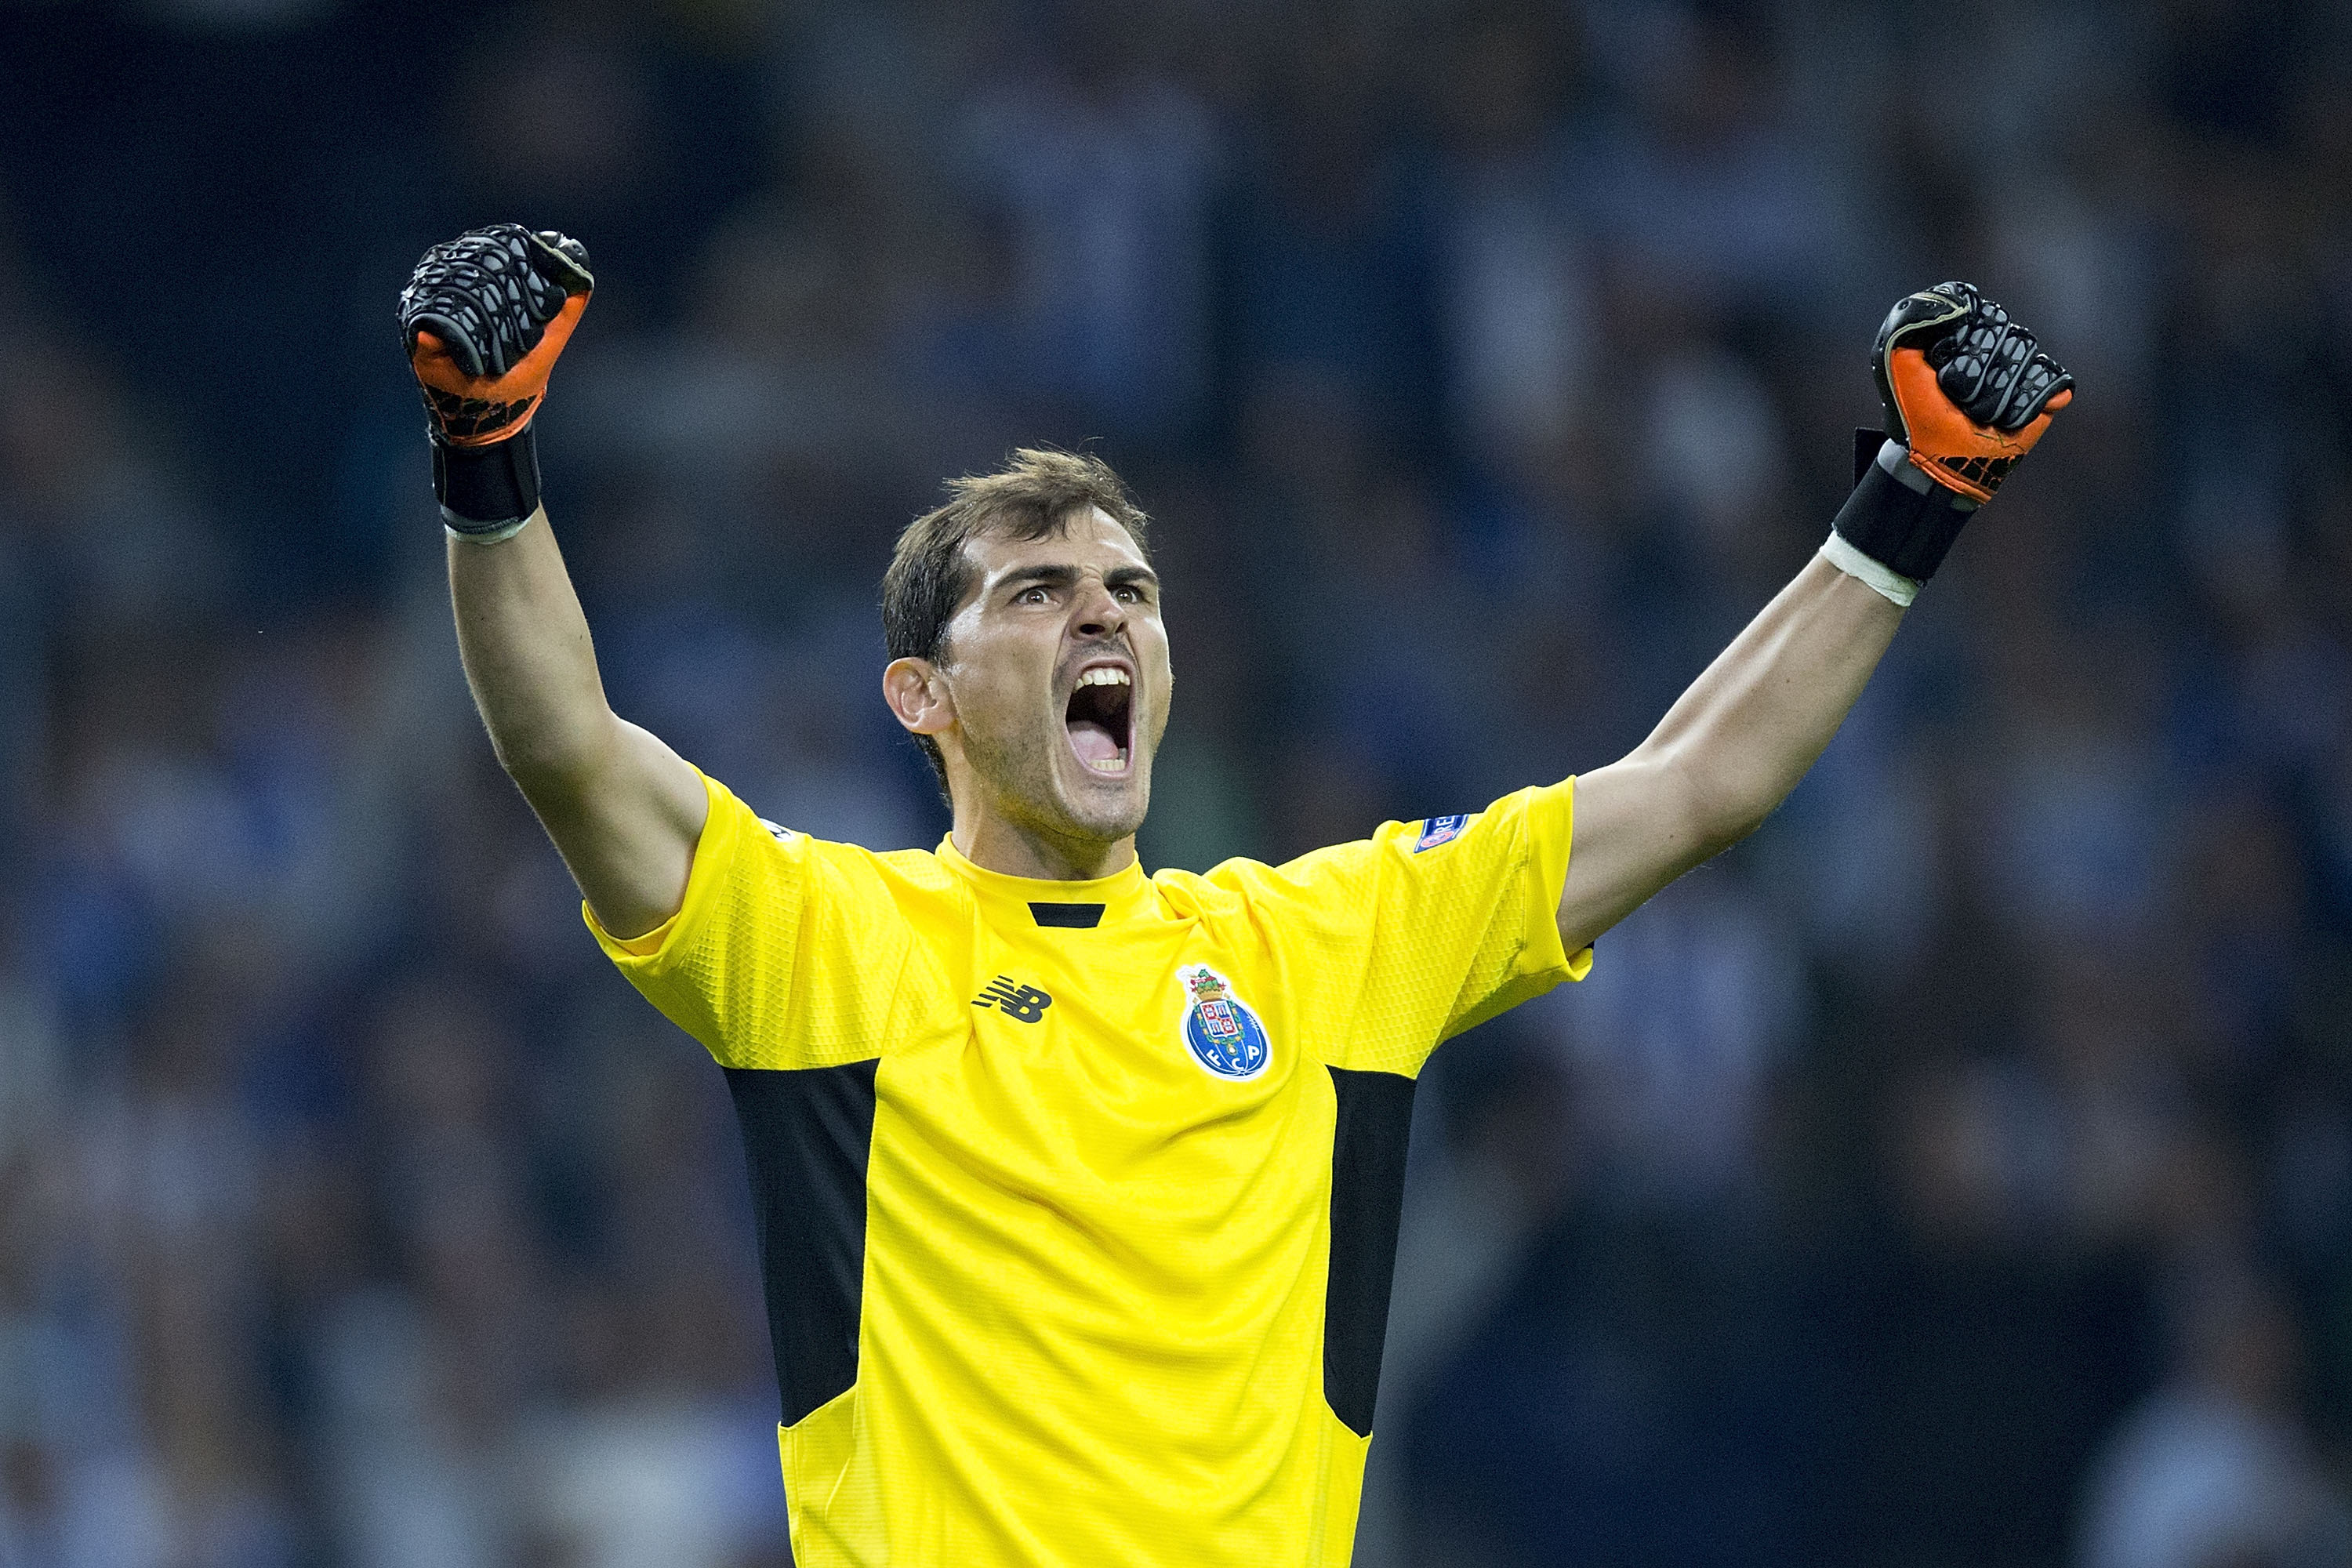 San Iker is a strong option in goal for Matchday 3. Is he in your team?